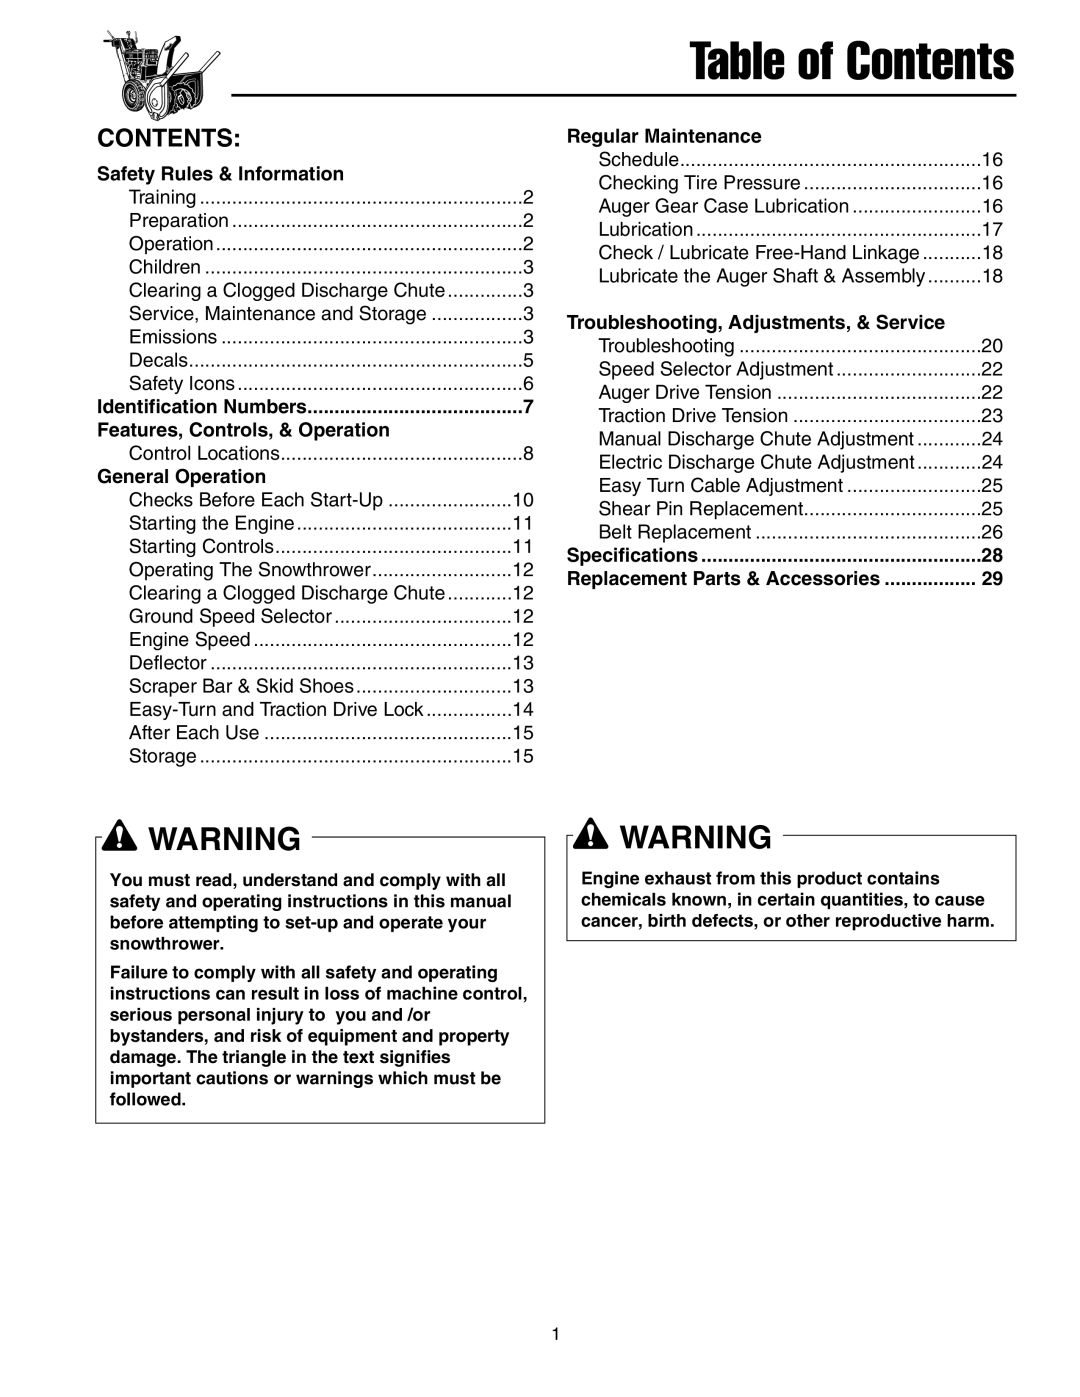 Snapper 1390 Table of Contents, Regular Maintenance, Safety Rules & Information, Troubleshooting, Adjustments, & Service 